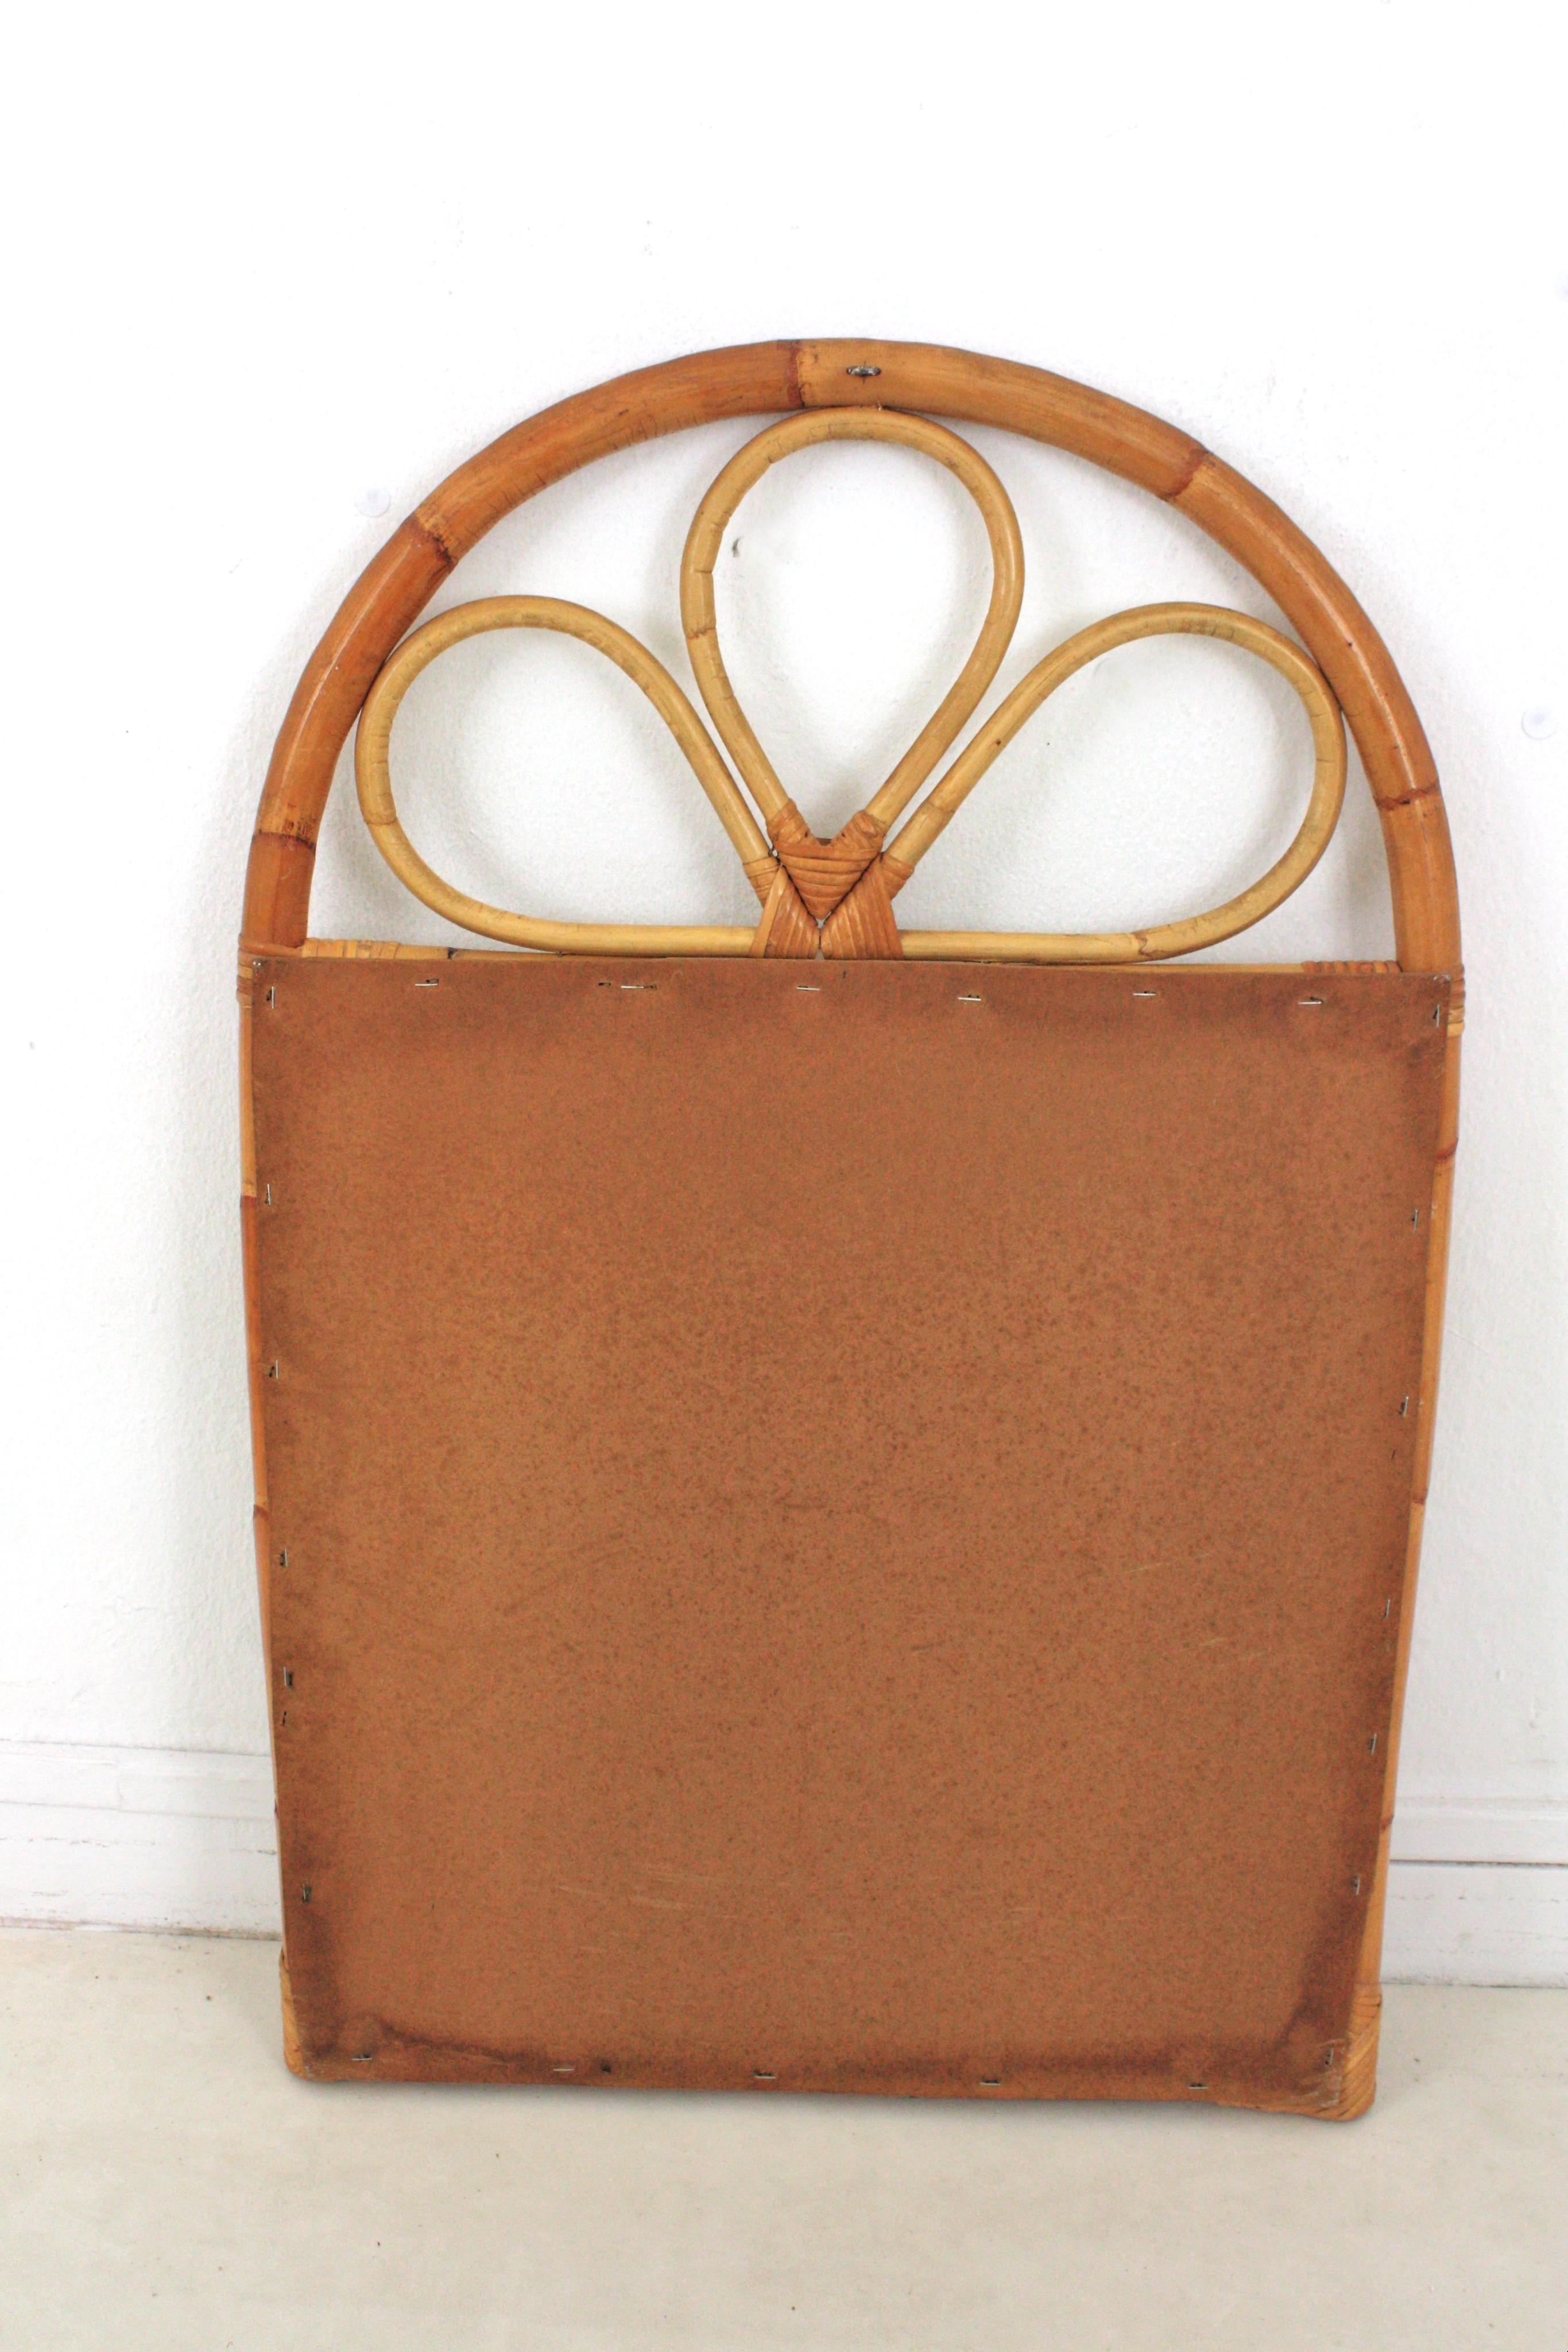 Spanish Rattan Bamboo Mirror with Arched Top, 1960s For Sale 4